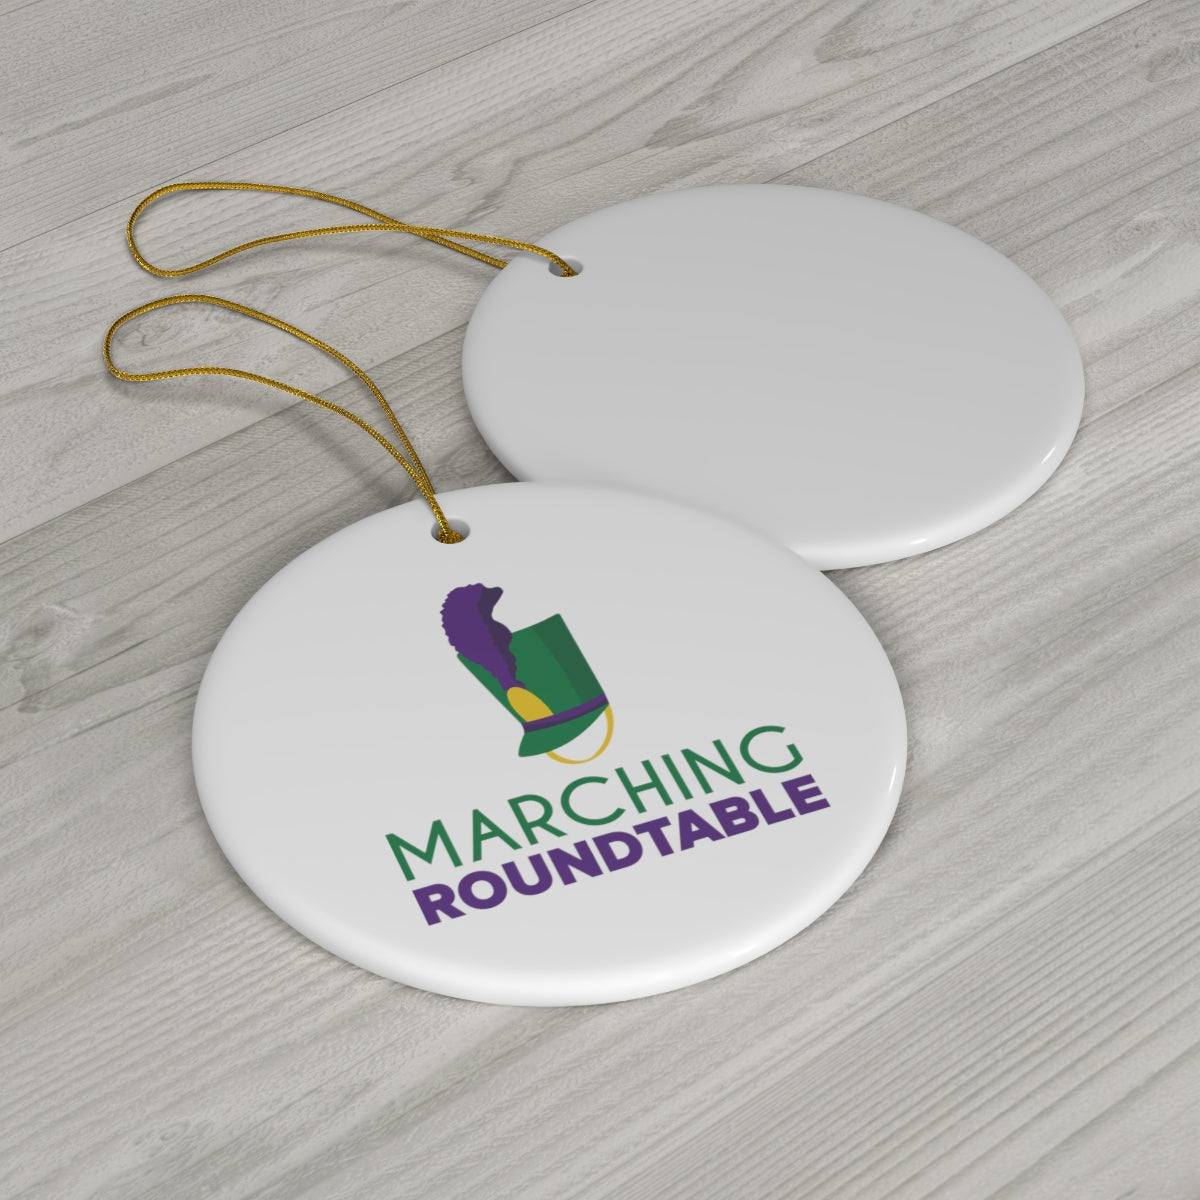 Marching Round Table Ornament